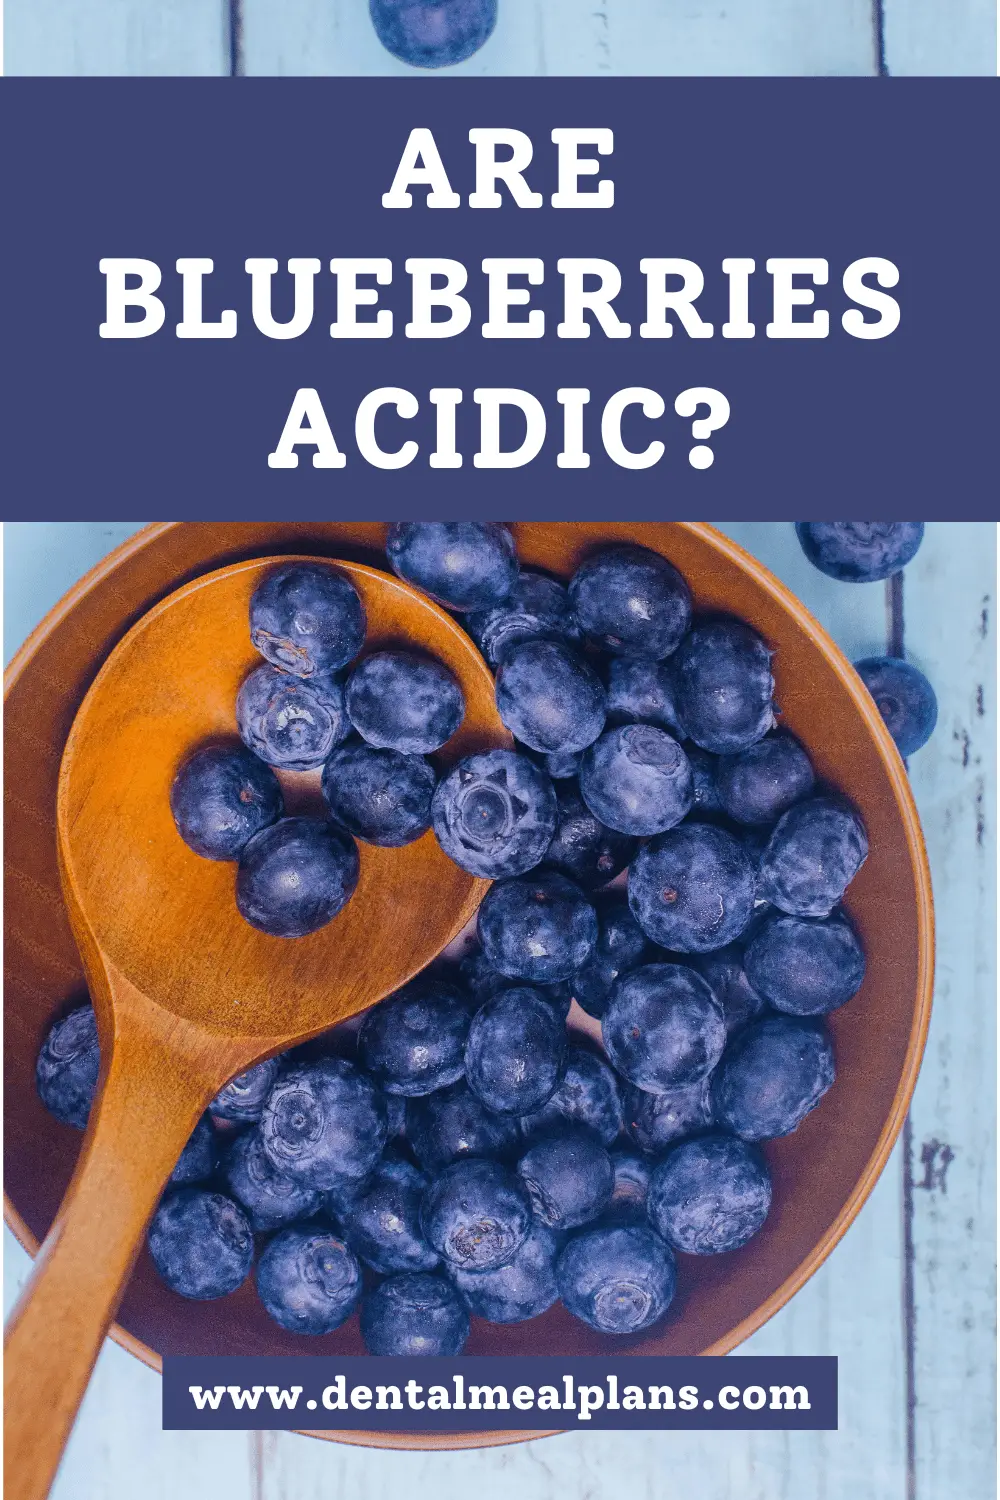 are blueberries acidic? image includes a bowl of blueberries